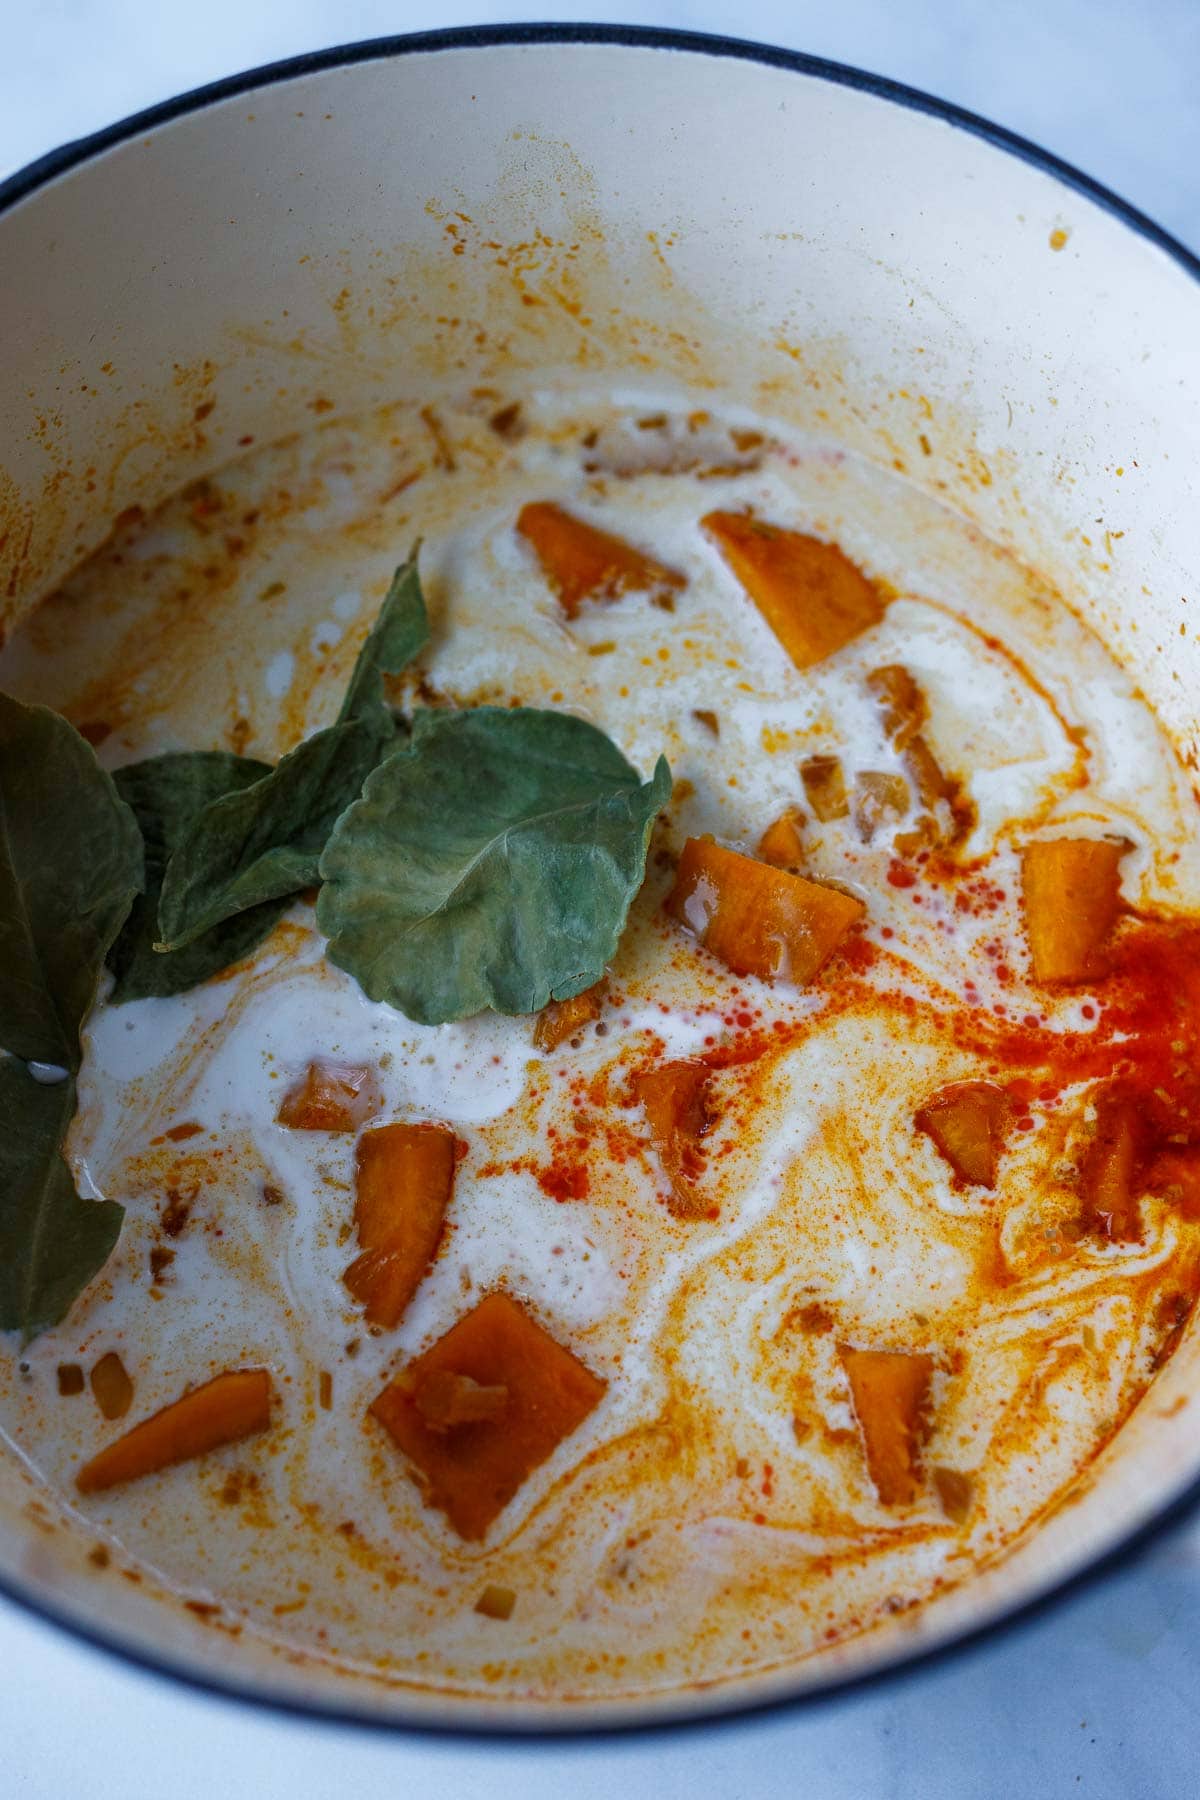 Coconut milk is added to pumpkin curry.